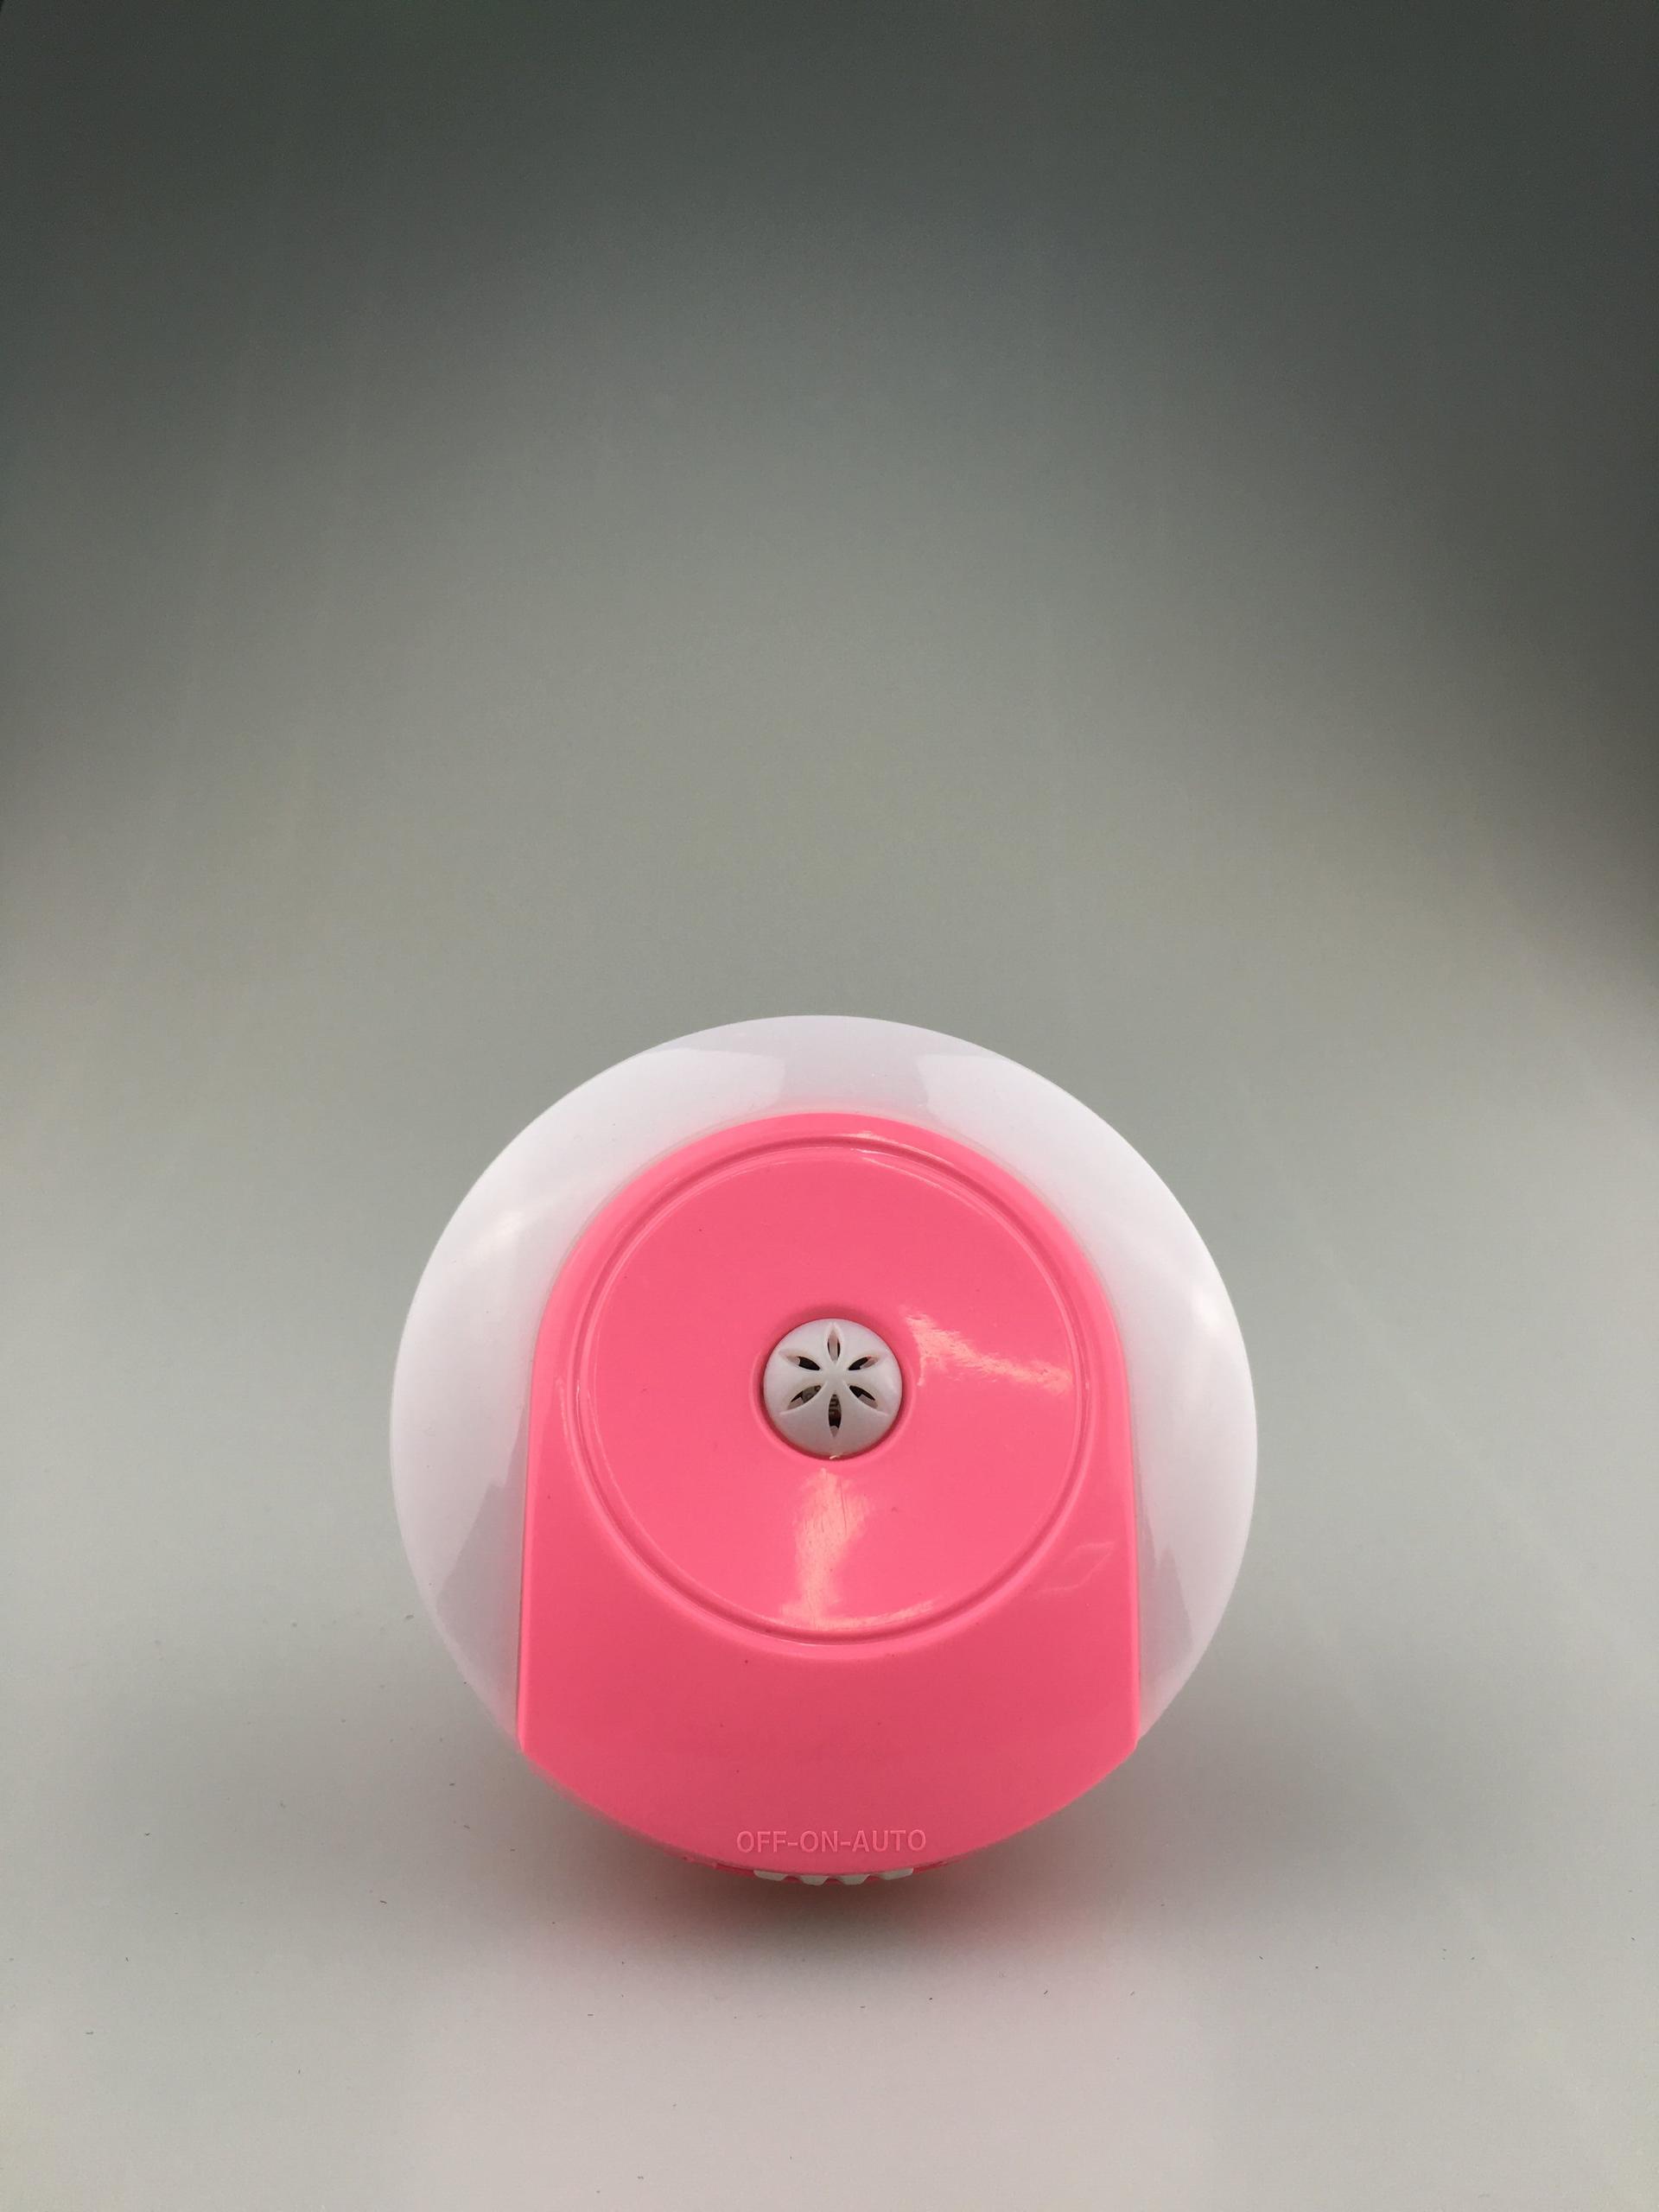 A78 OEM Auto LED dusk to dawn baby kids CE ROHS BS SAA CB led small sensor plug in night light FOR bedroom